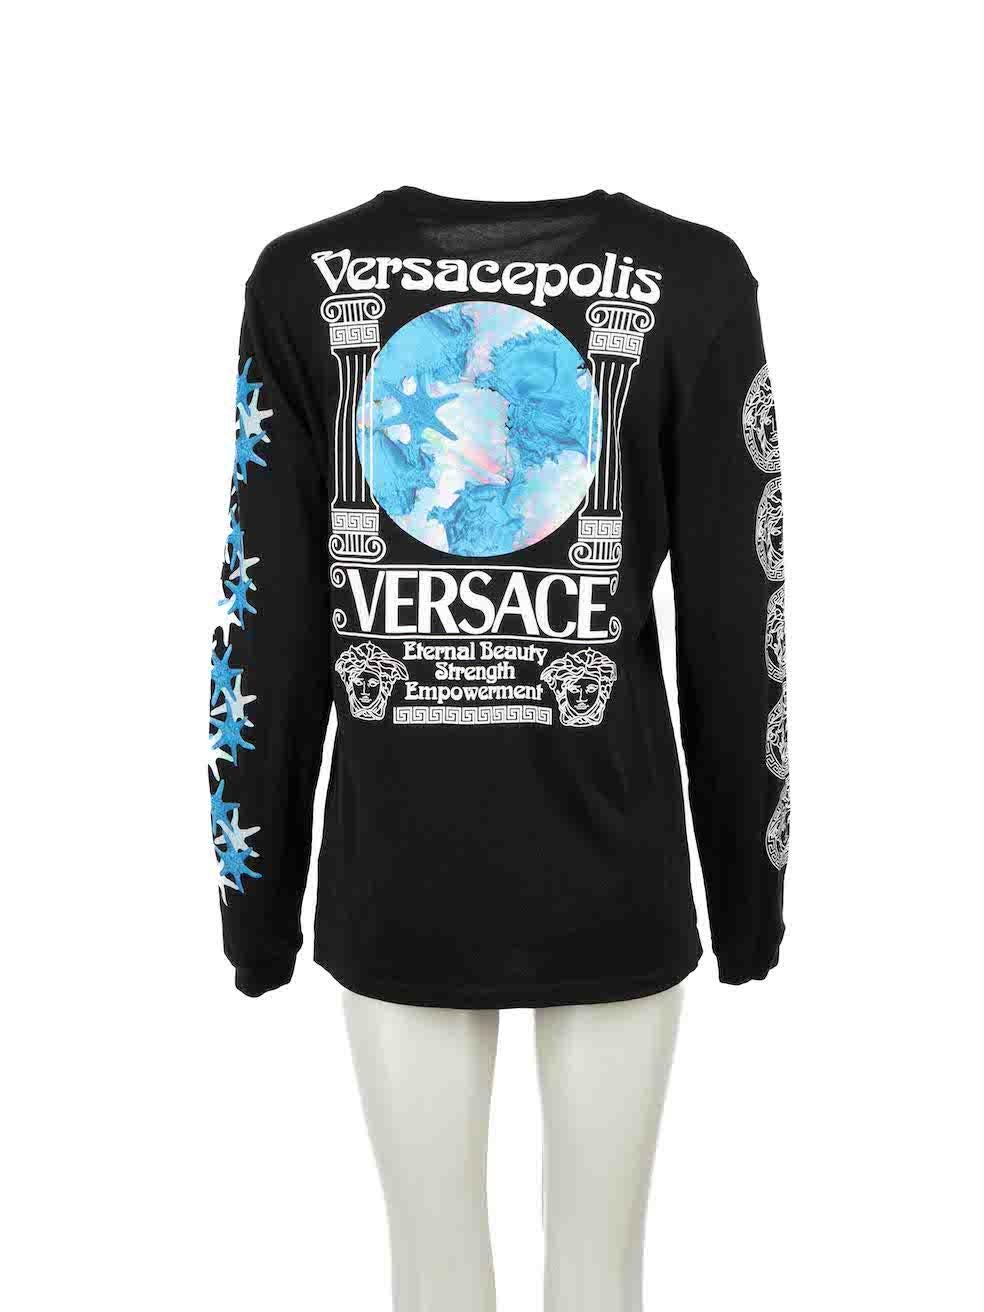 Versace Black Versacepolis Graphic Long Sleeve Top Size S In Excellent Condition For Sale In London, GB